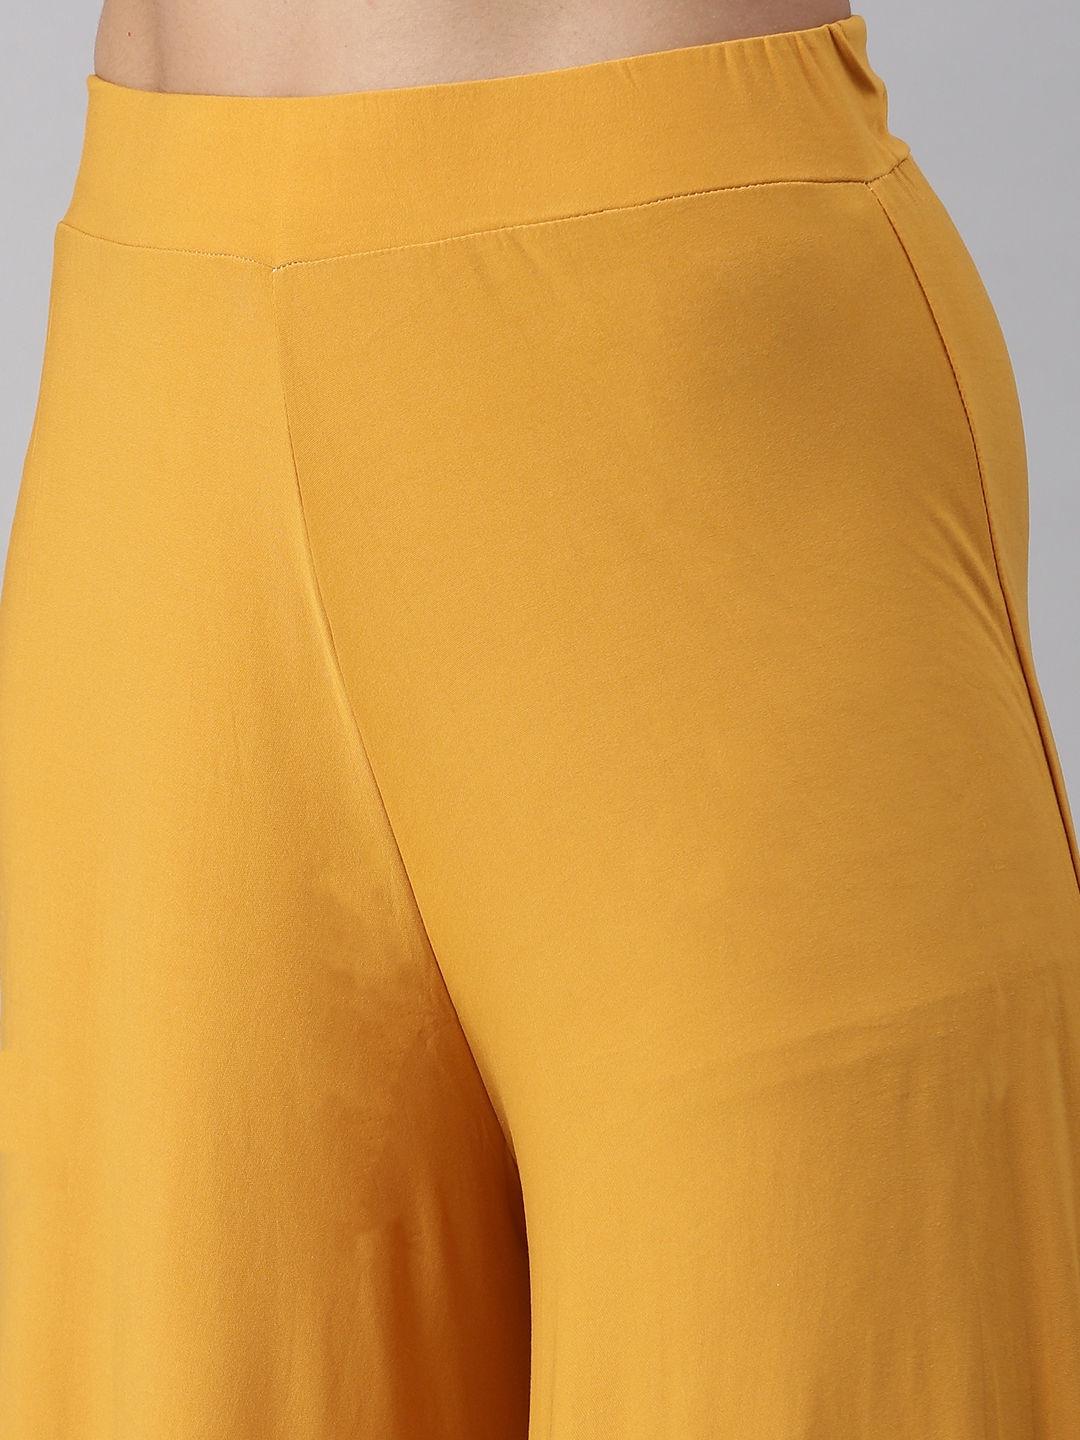 Women's Yellow Others Solid Palazzos